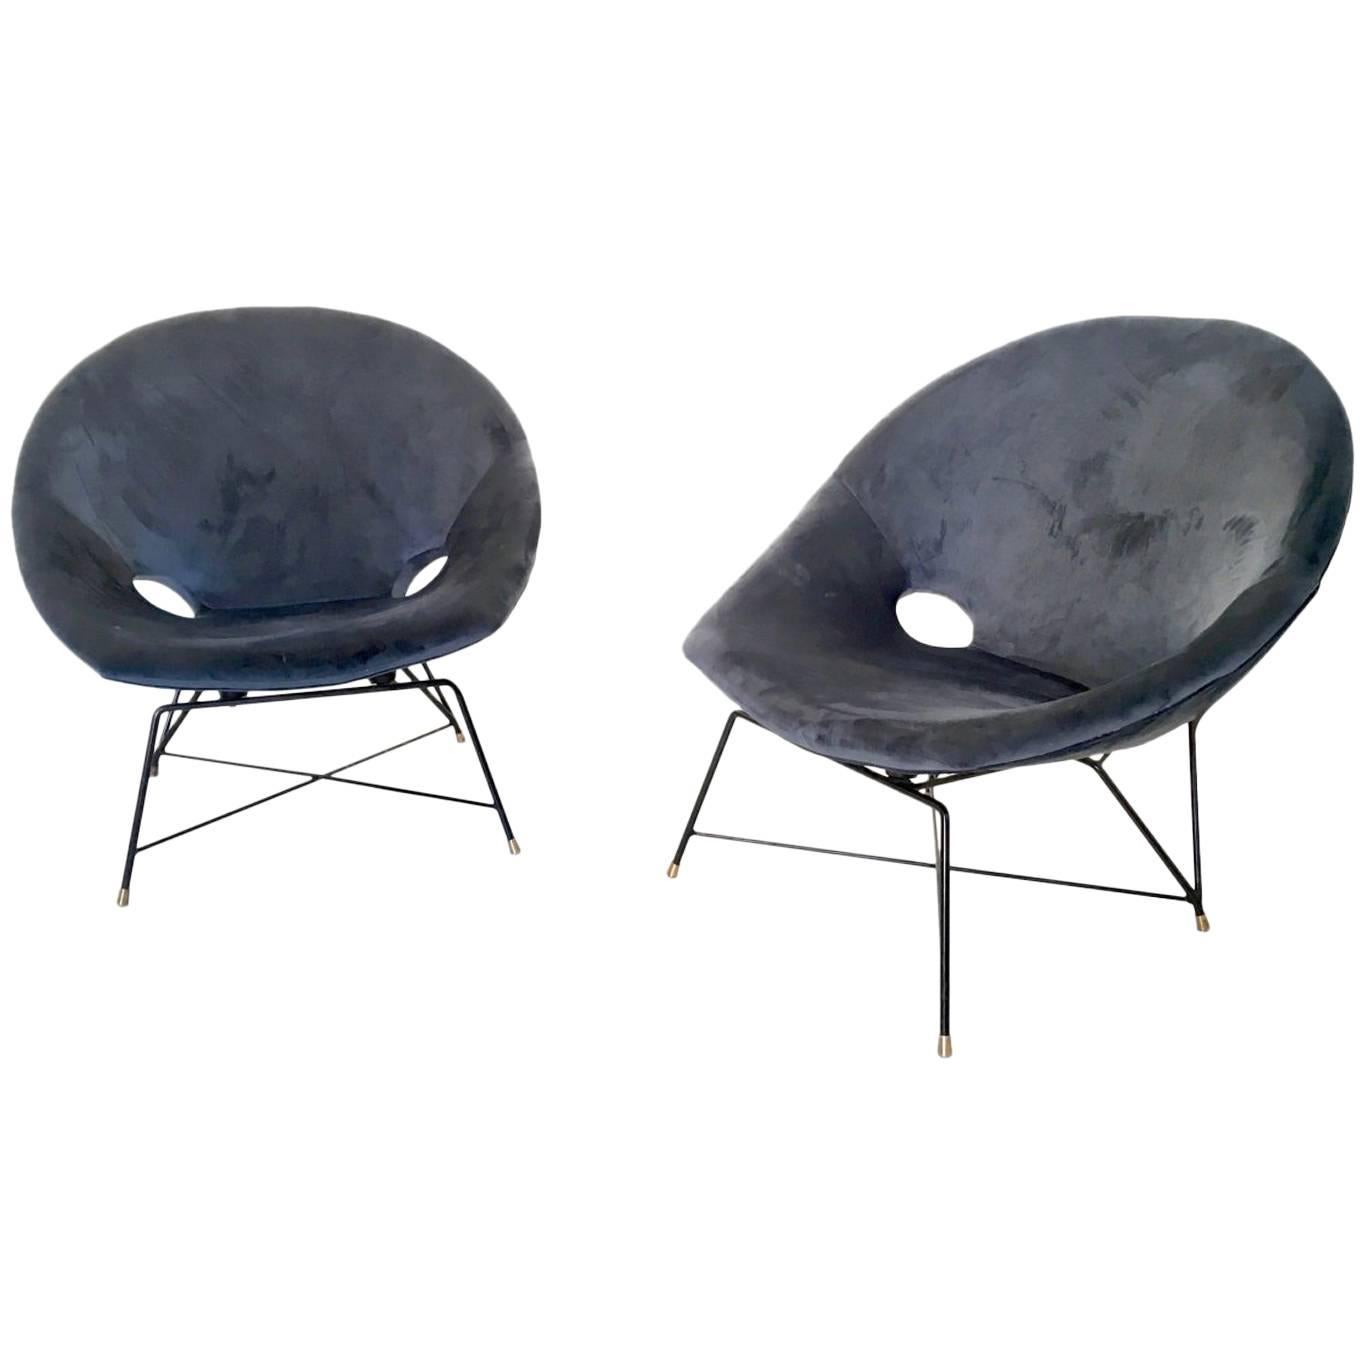 Pair of Blue Velvet Lounge Chairs by Augusto Bozzi for Saporiti, Italy, 1950s